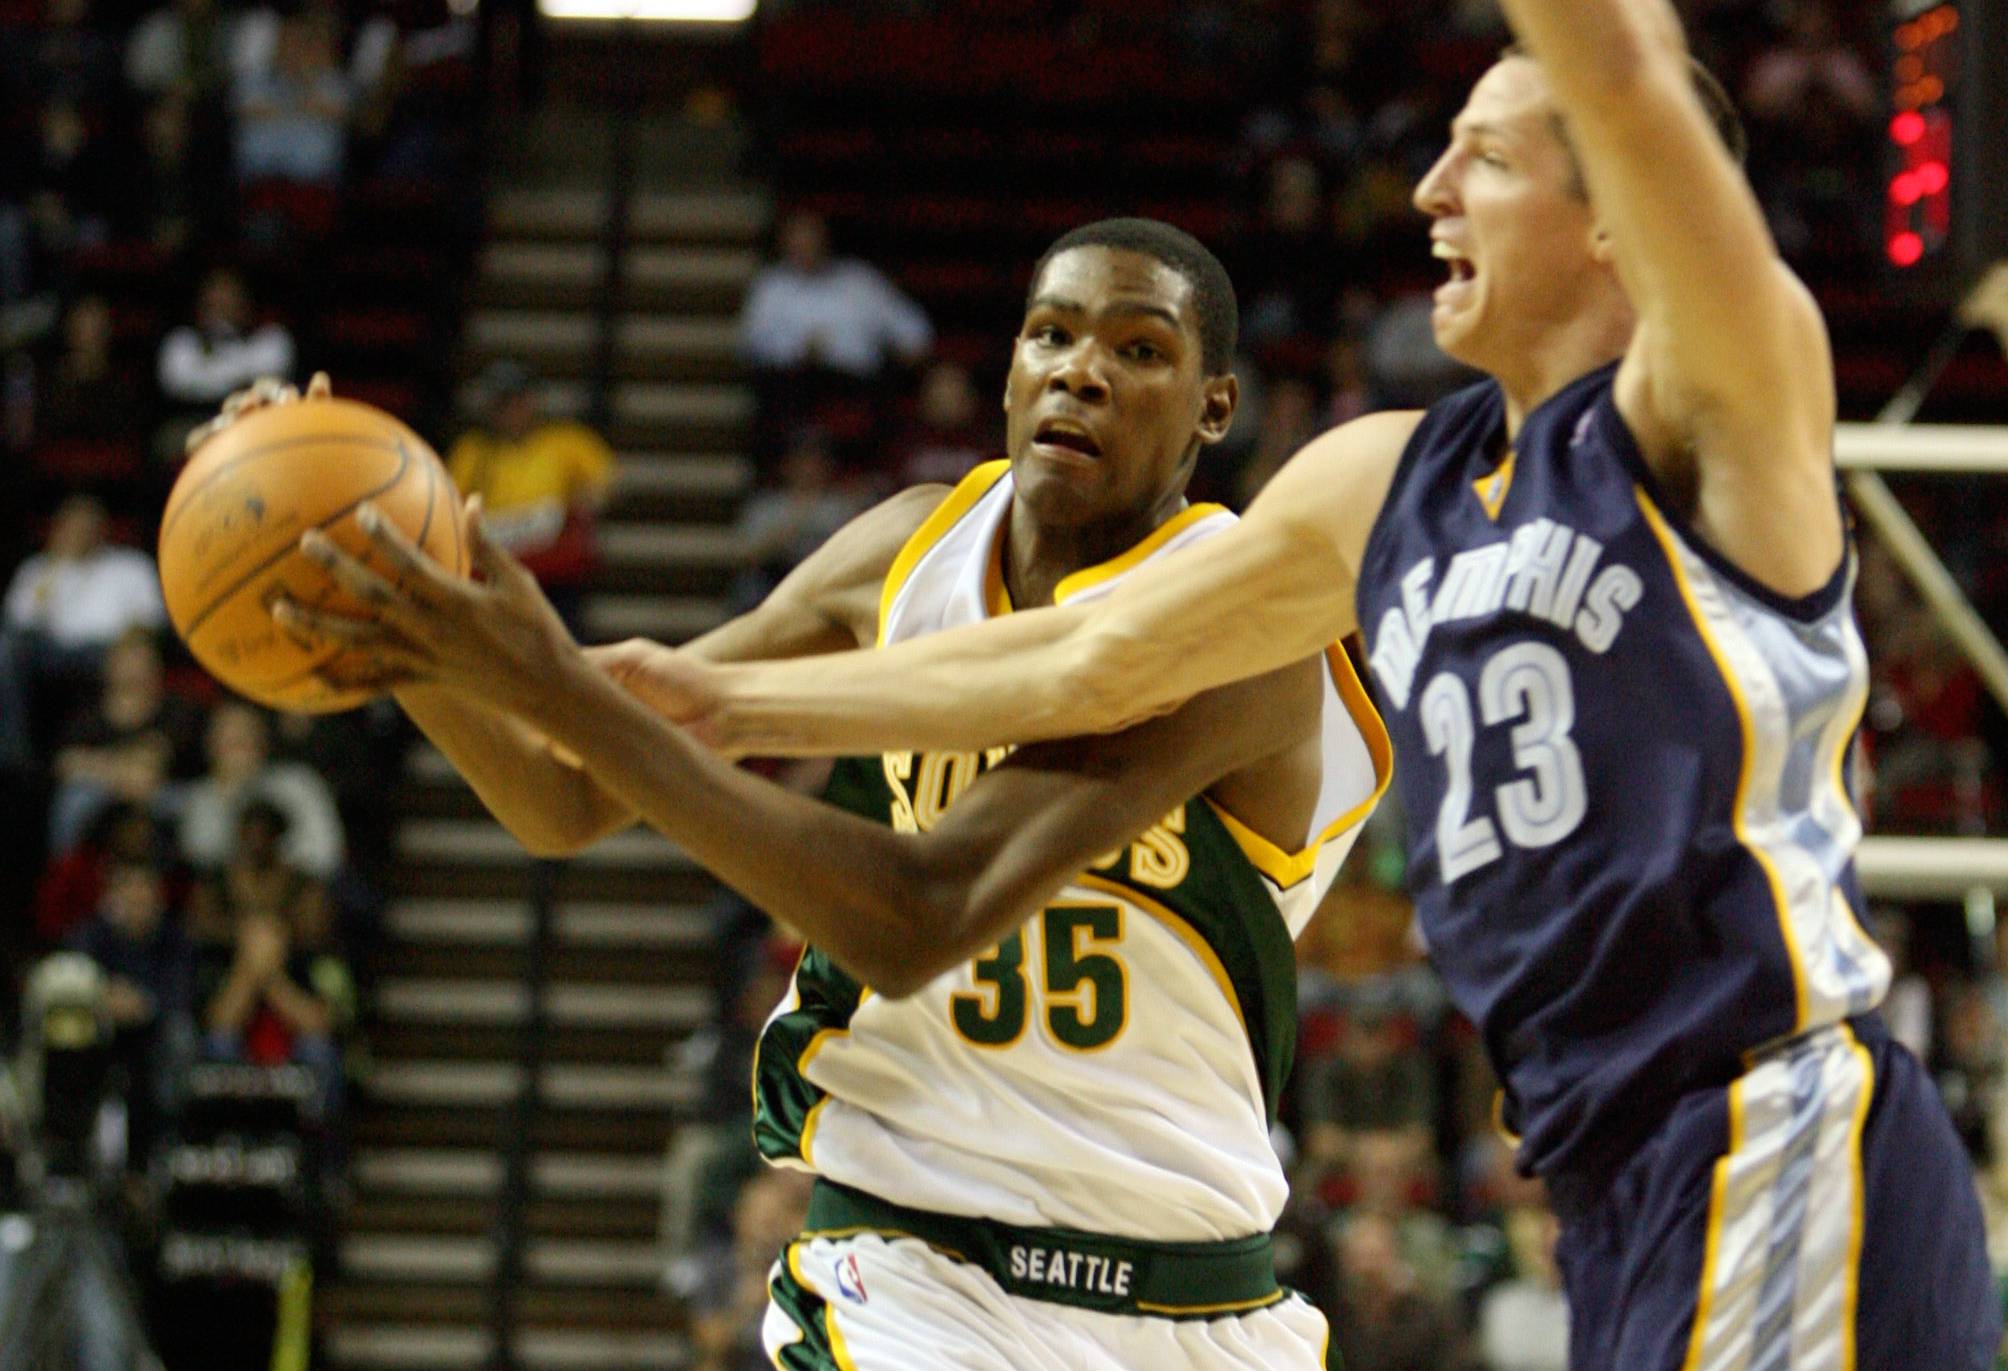 Nov 07, 2007 - Seattle, Washington, USA - NBA Basketball: The Memphis Grizzlies CASEY JACOBSEN (23) against KEVIN DURANT (35) of the Seattle SuperSonics at Key Arena Nov. 7, 2007 in Seattle, Wash. The Grizzlies won 105-98. (Photo by Jay Drowns/Sporting News via Getty Images via Getty Images)